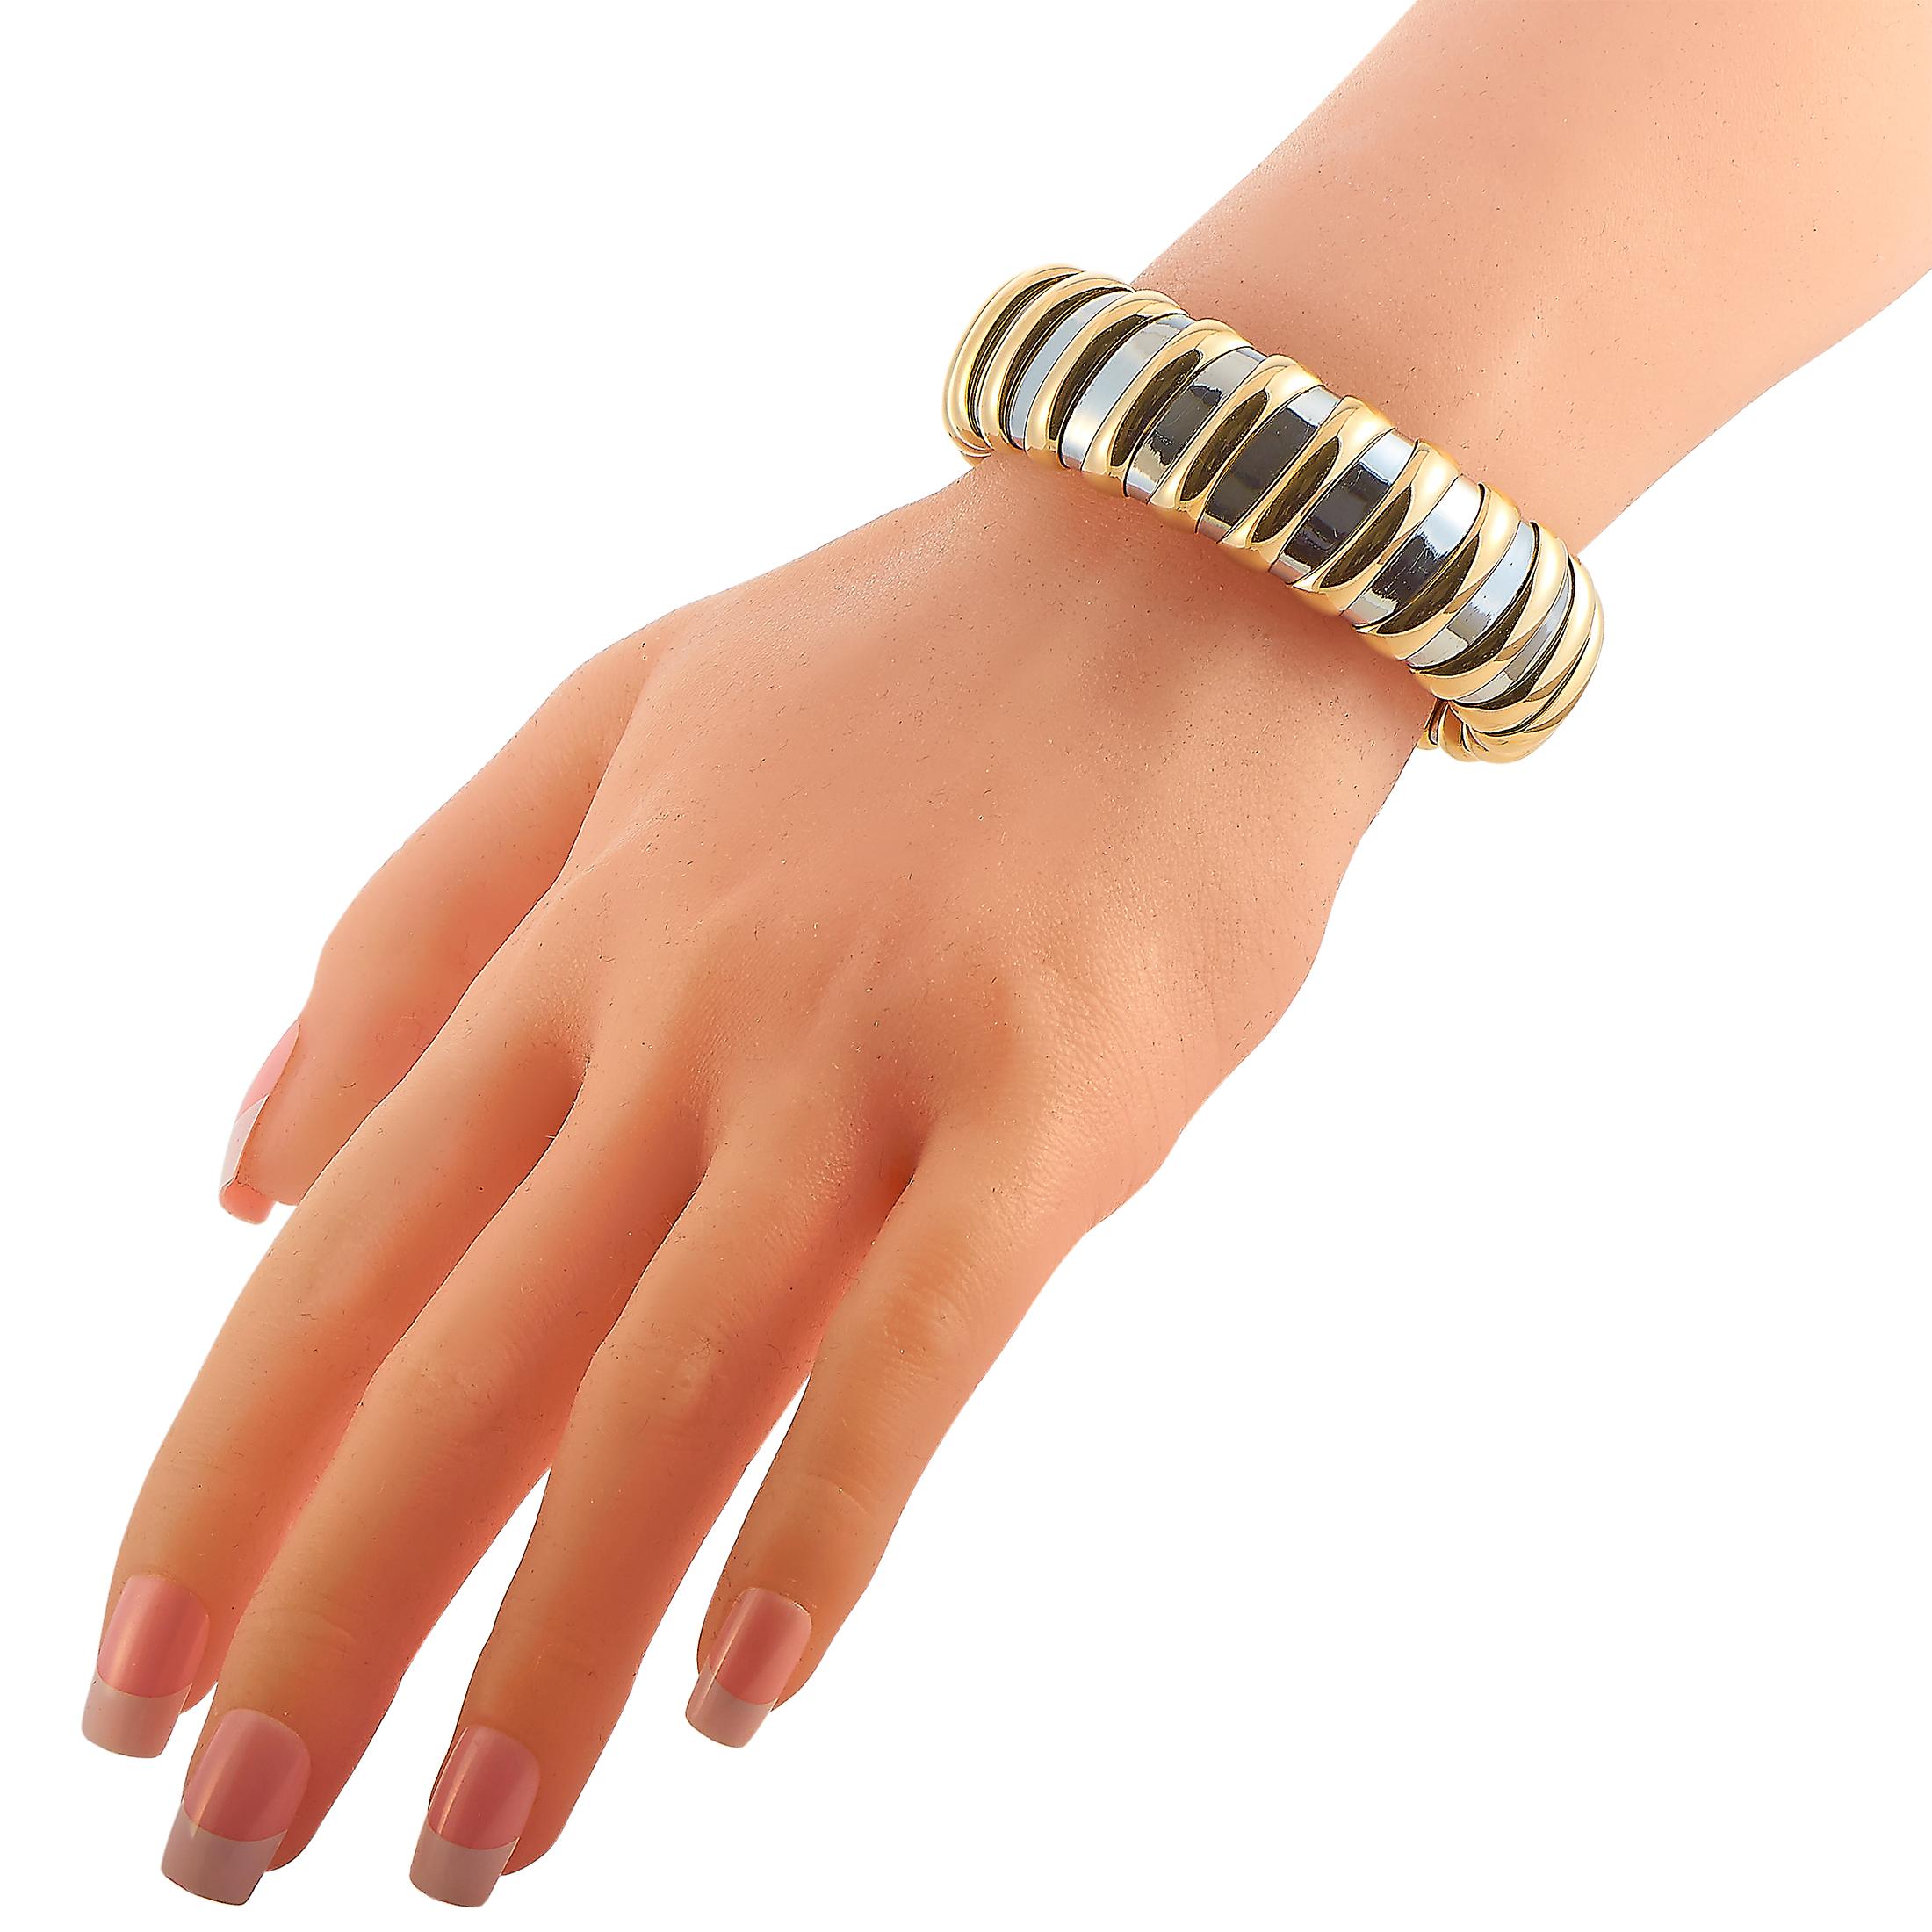 This Bvlgari bracelet is made out of 18K yellow gold and stainless steel and weighs 89.1 grams. It measures 7.85” in length and boasts a 2.50” diameter.

The bracelet is offered in estate condition and includes the manufacturer’s box.